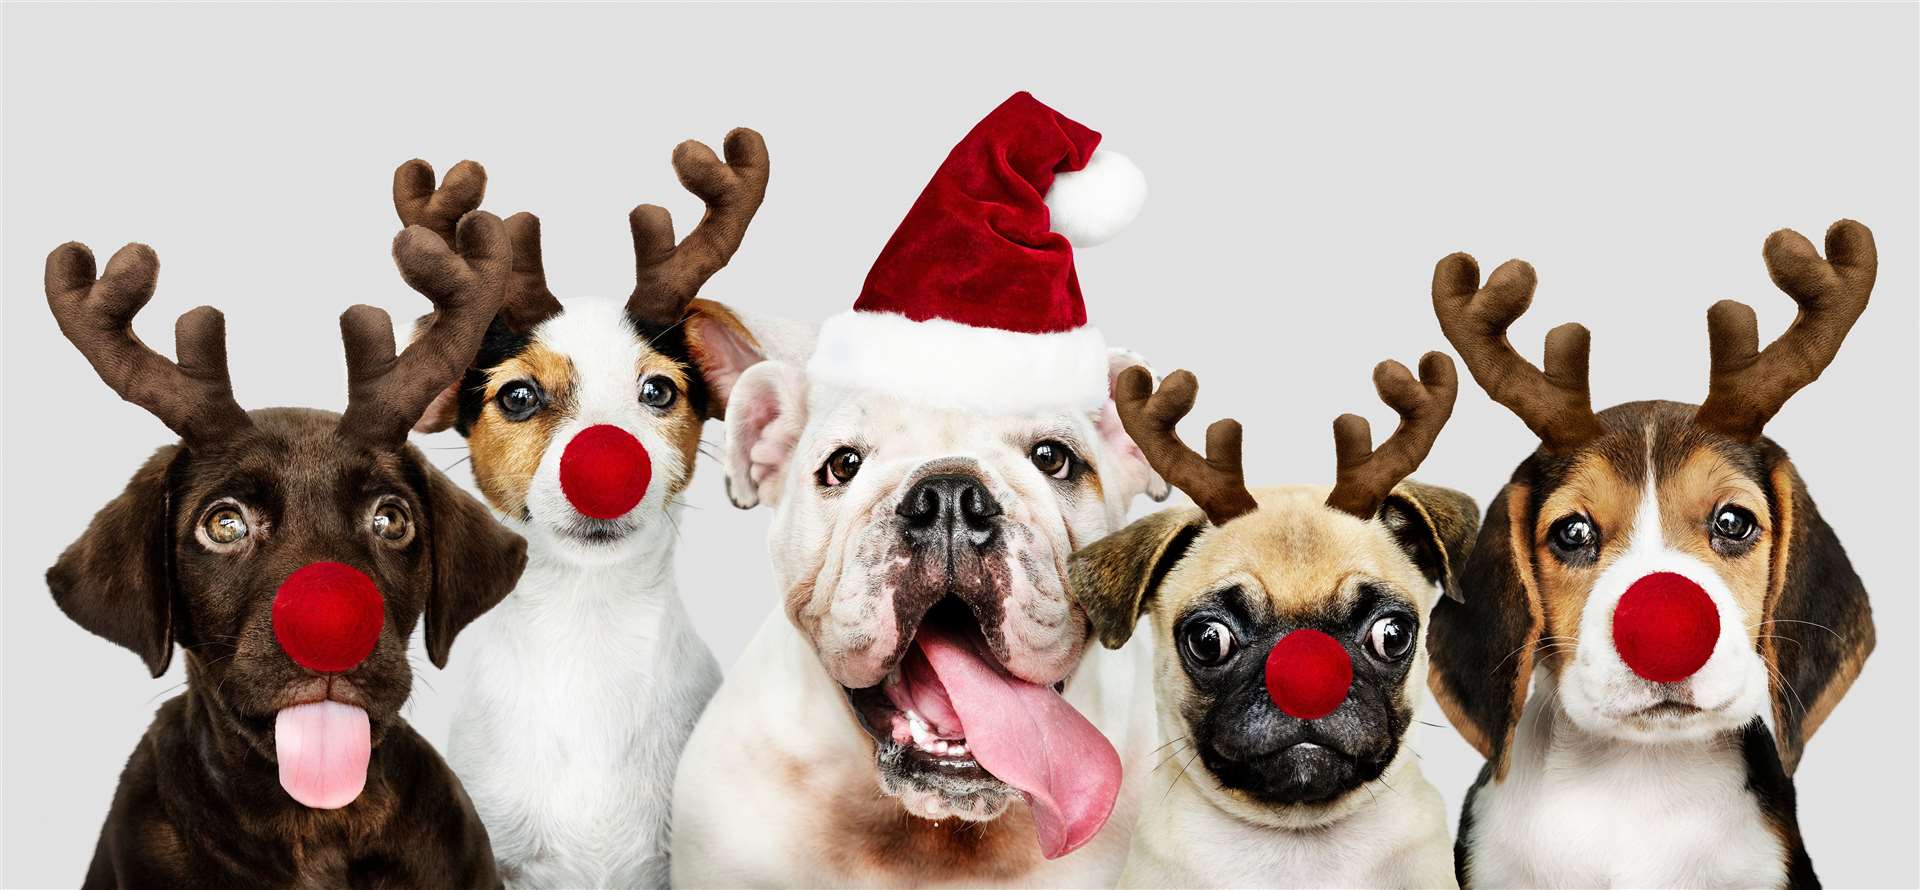 Christmas can be fun for your pets too, just make it a safe one.